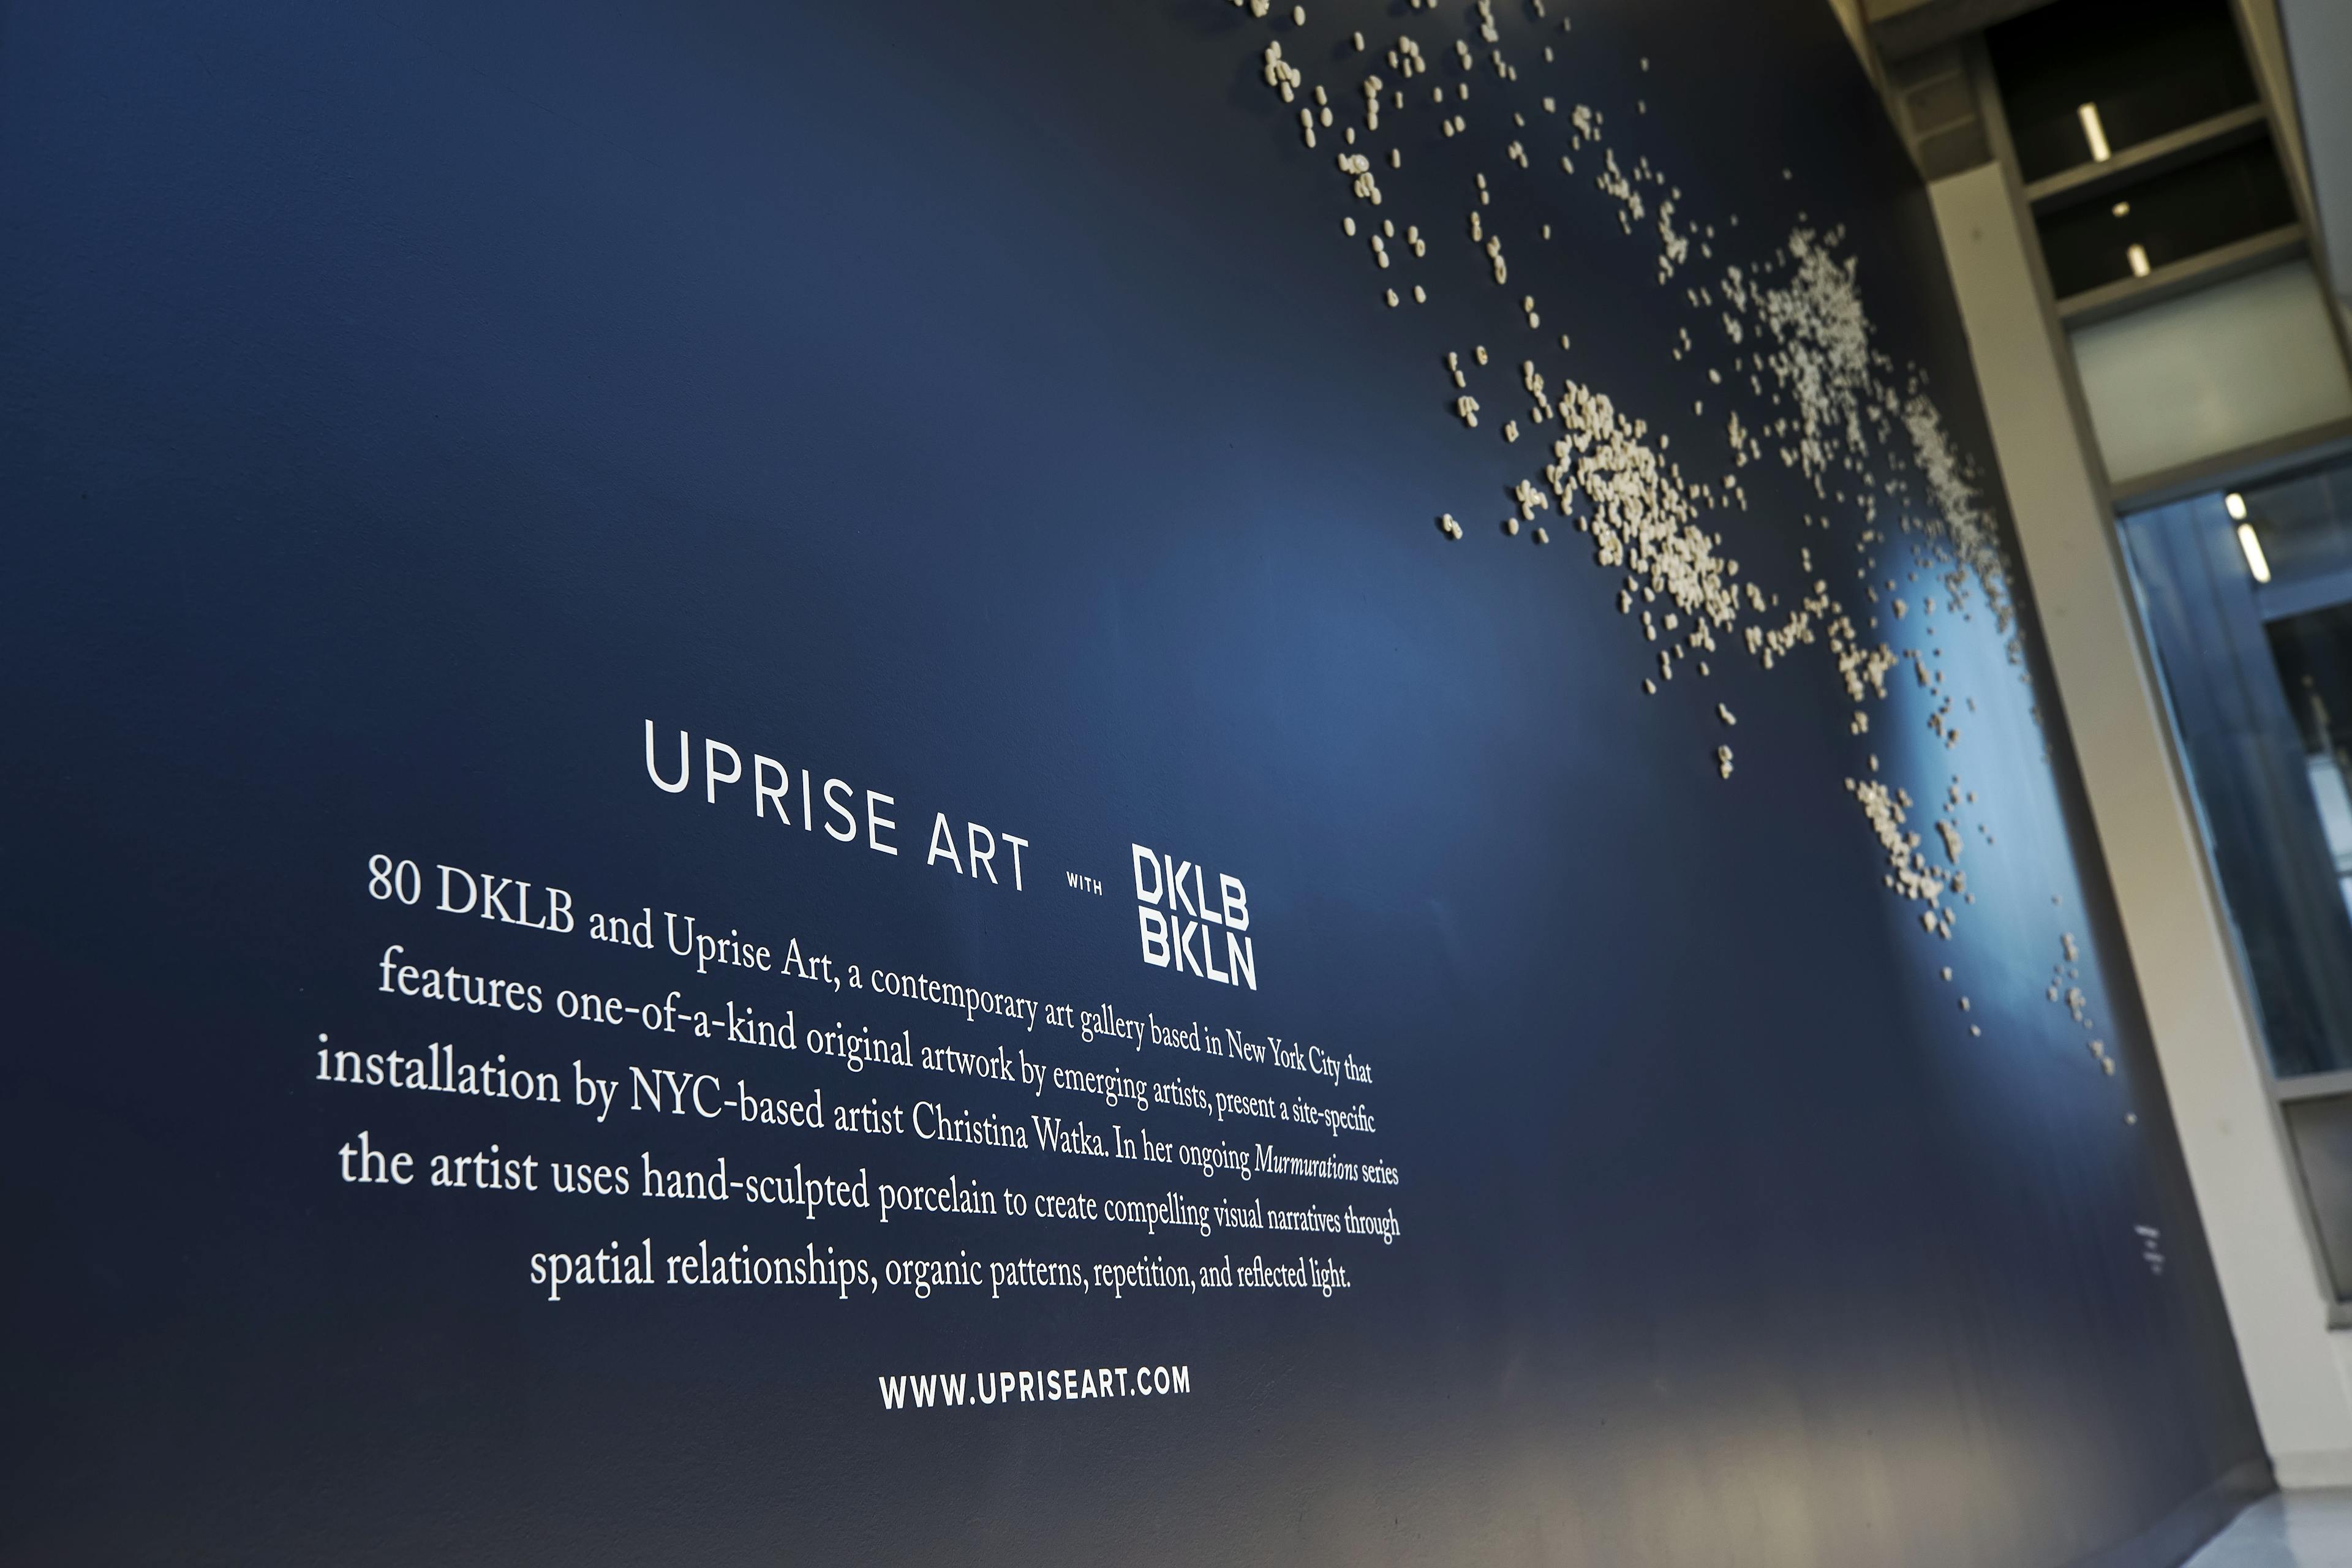 Close-up of text on a dark blue wall that describes the custom wall installation by artist Christina Watka.